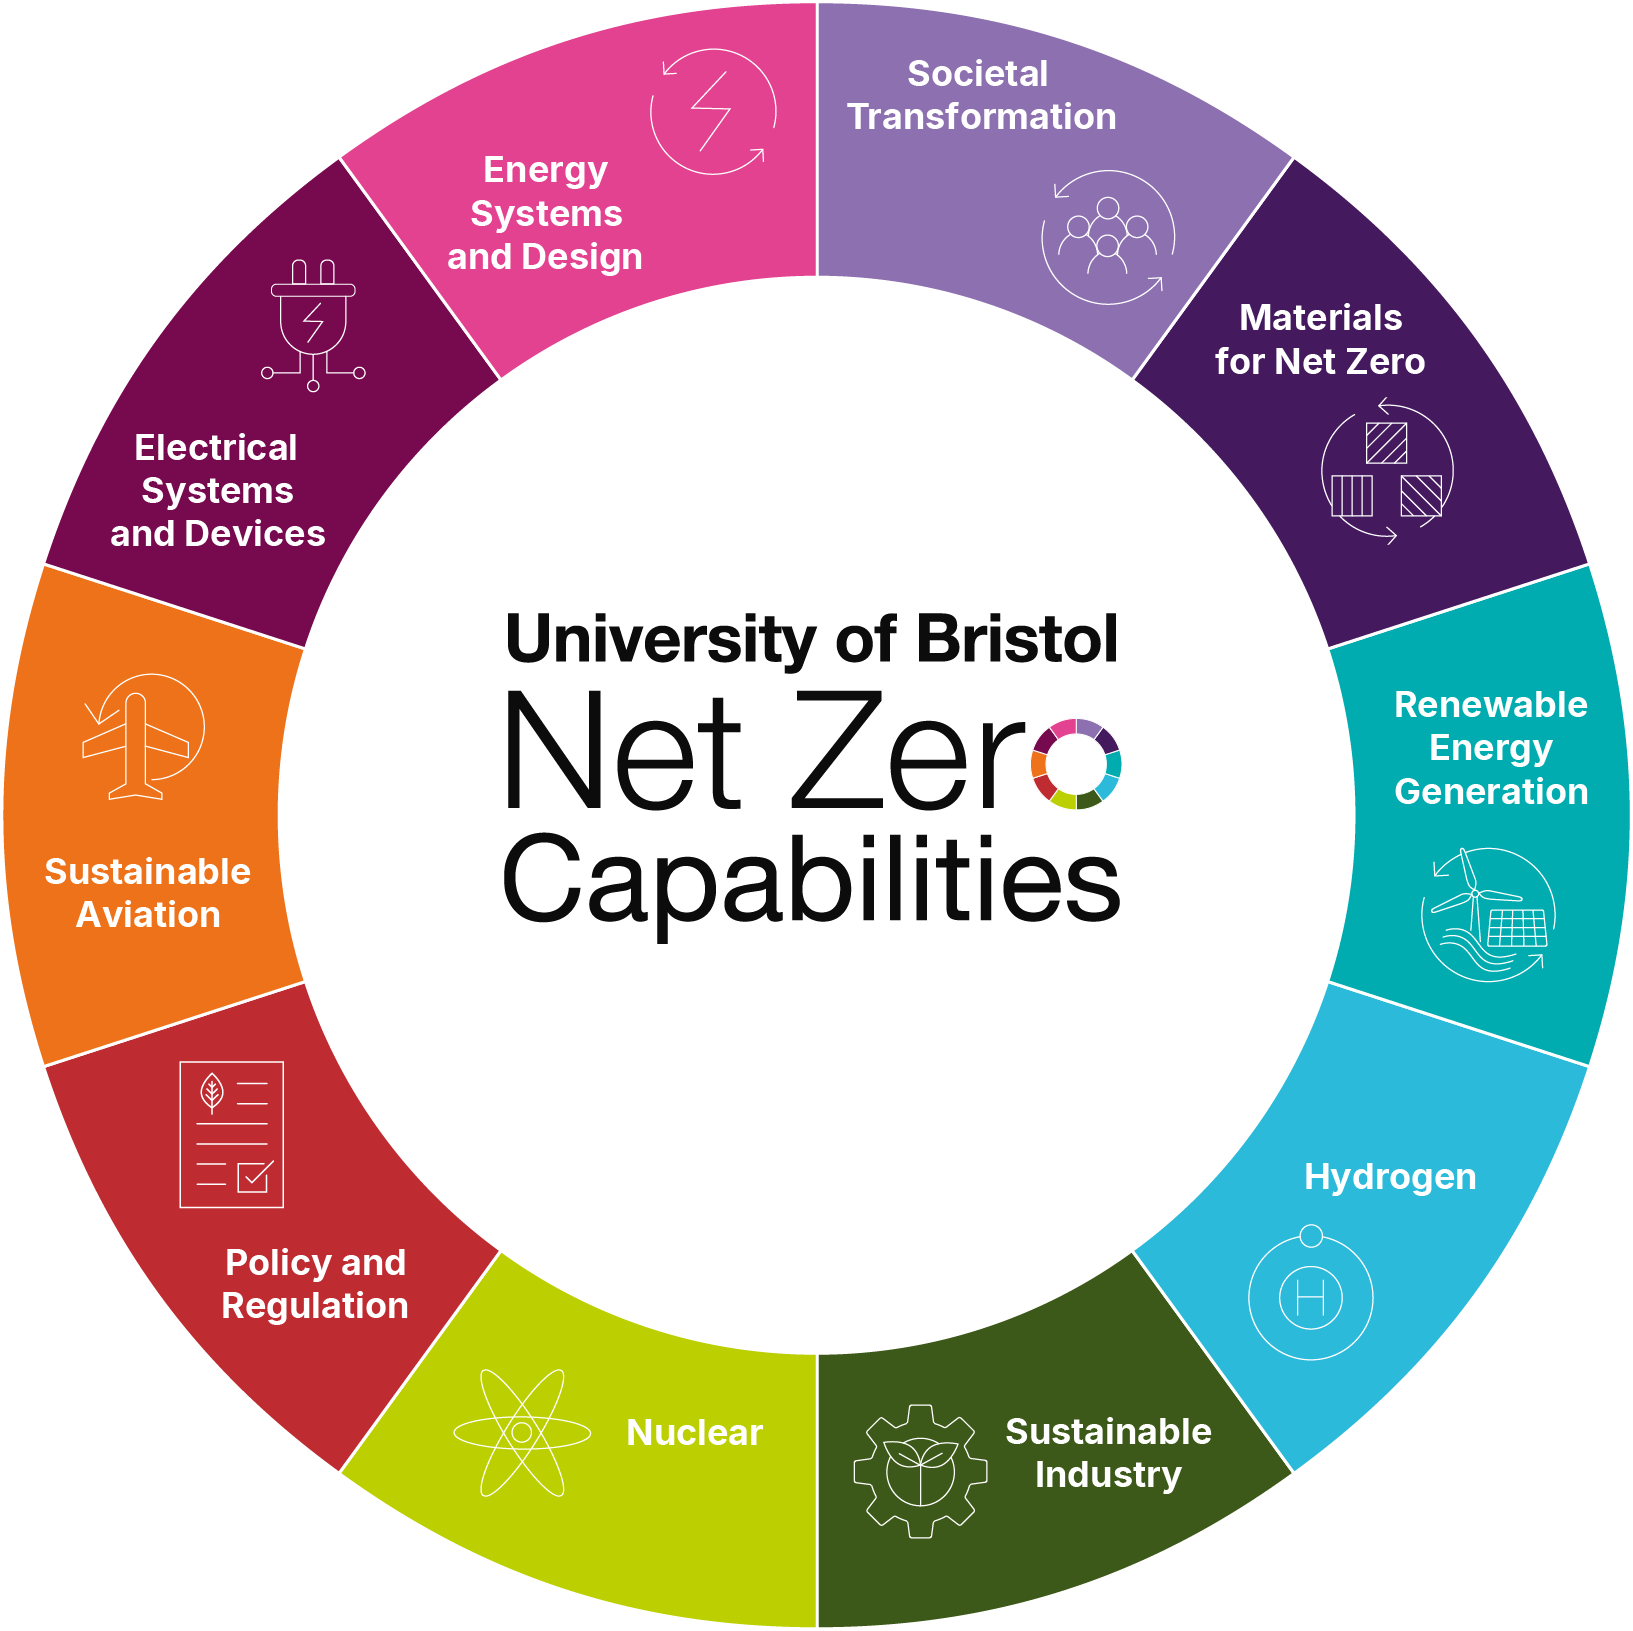 Our Net Zero themes illustrated in a circle with multiple colours